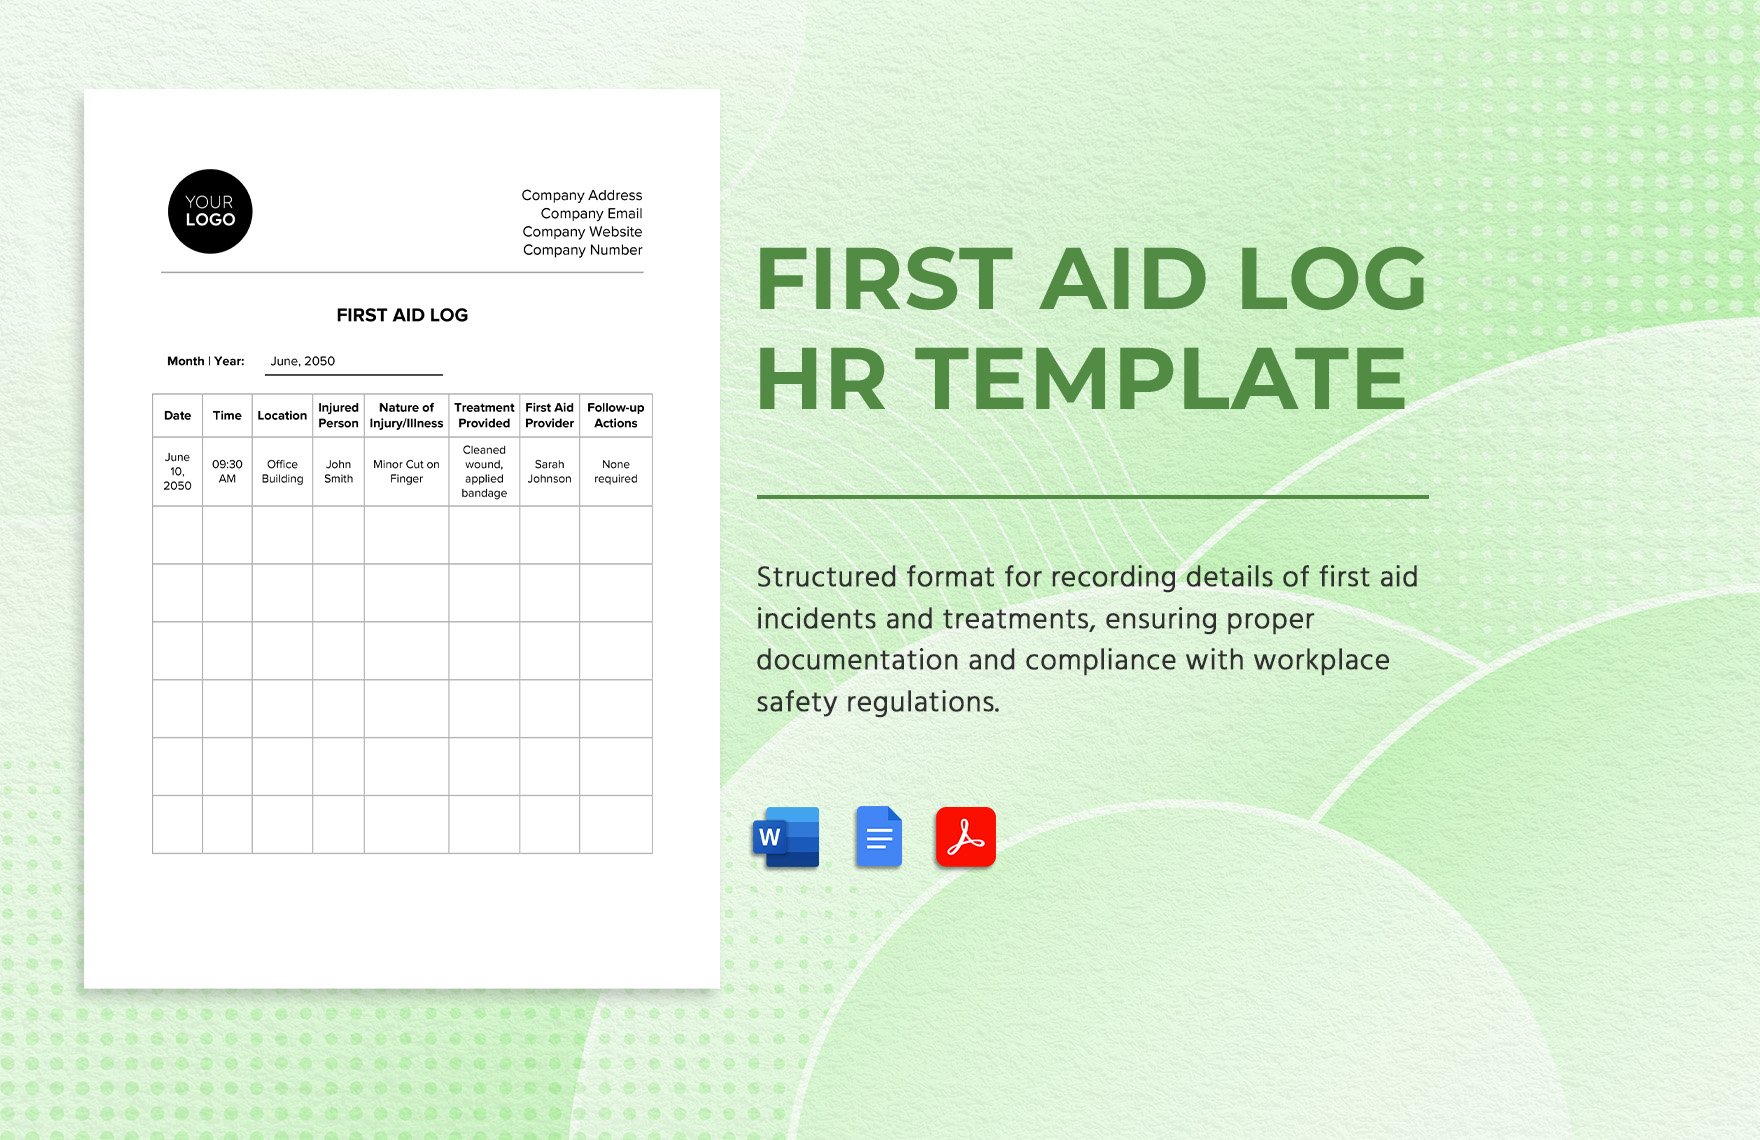 First Aid Log HR Template in Word, Google Docs, PDF